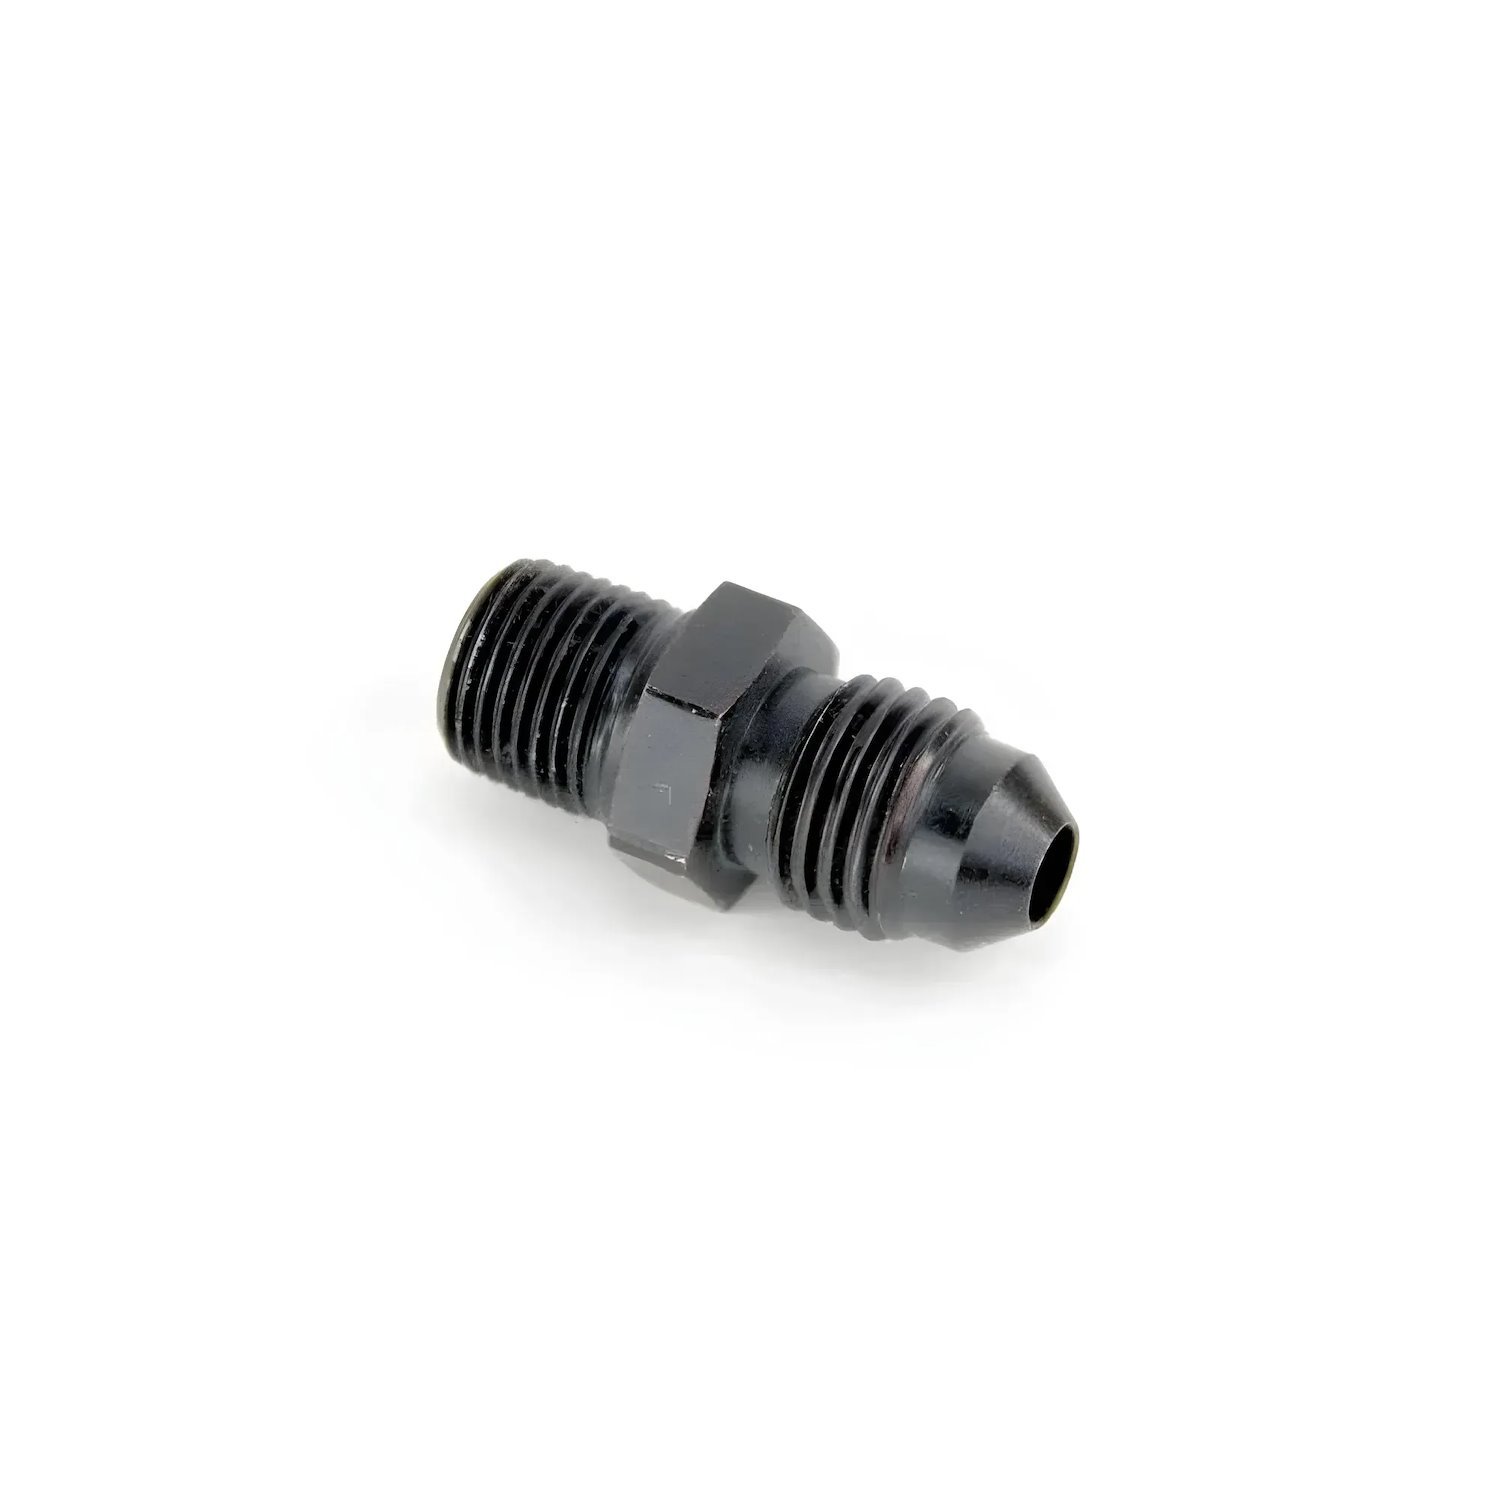 00-01152-F 1/8 in. NPT x 4AN Straight Filter Fitting, Male/Male